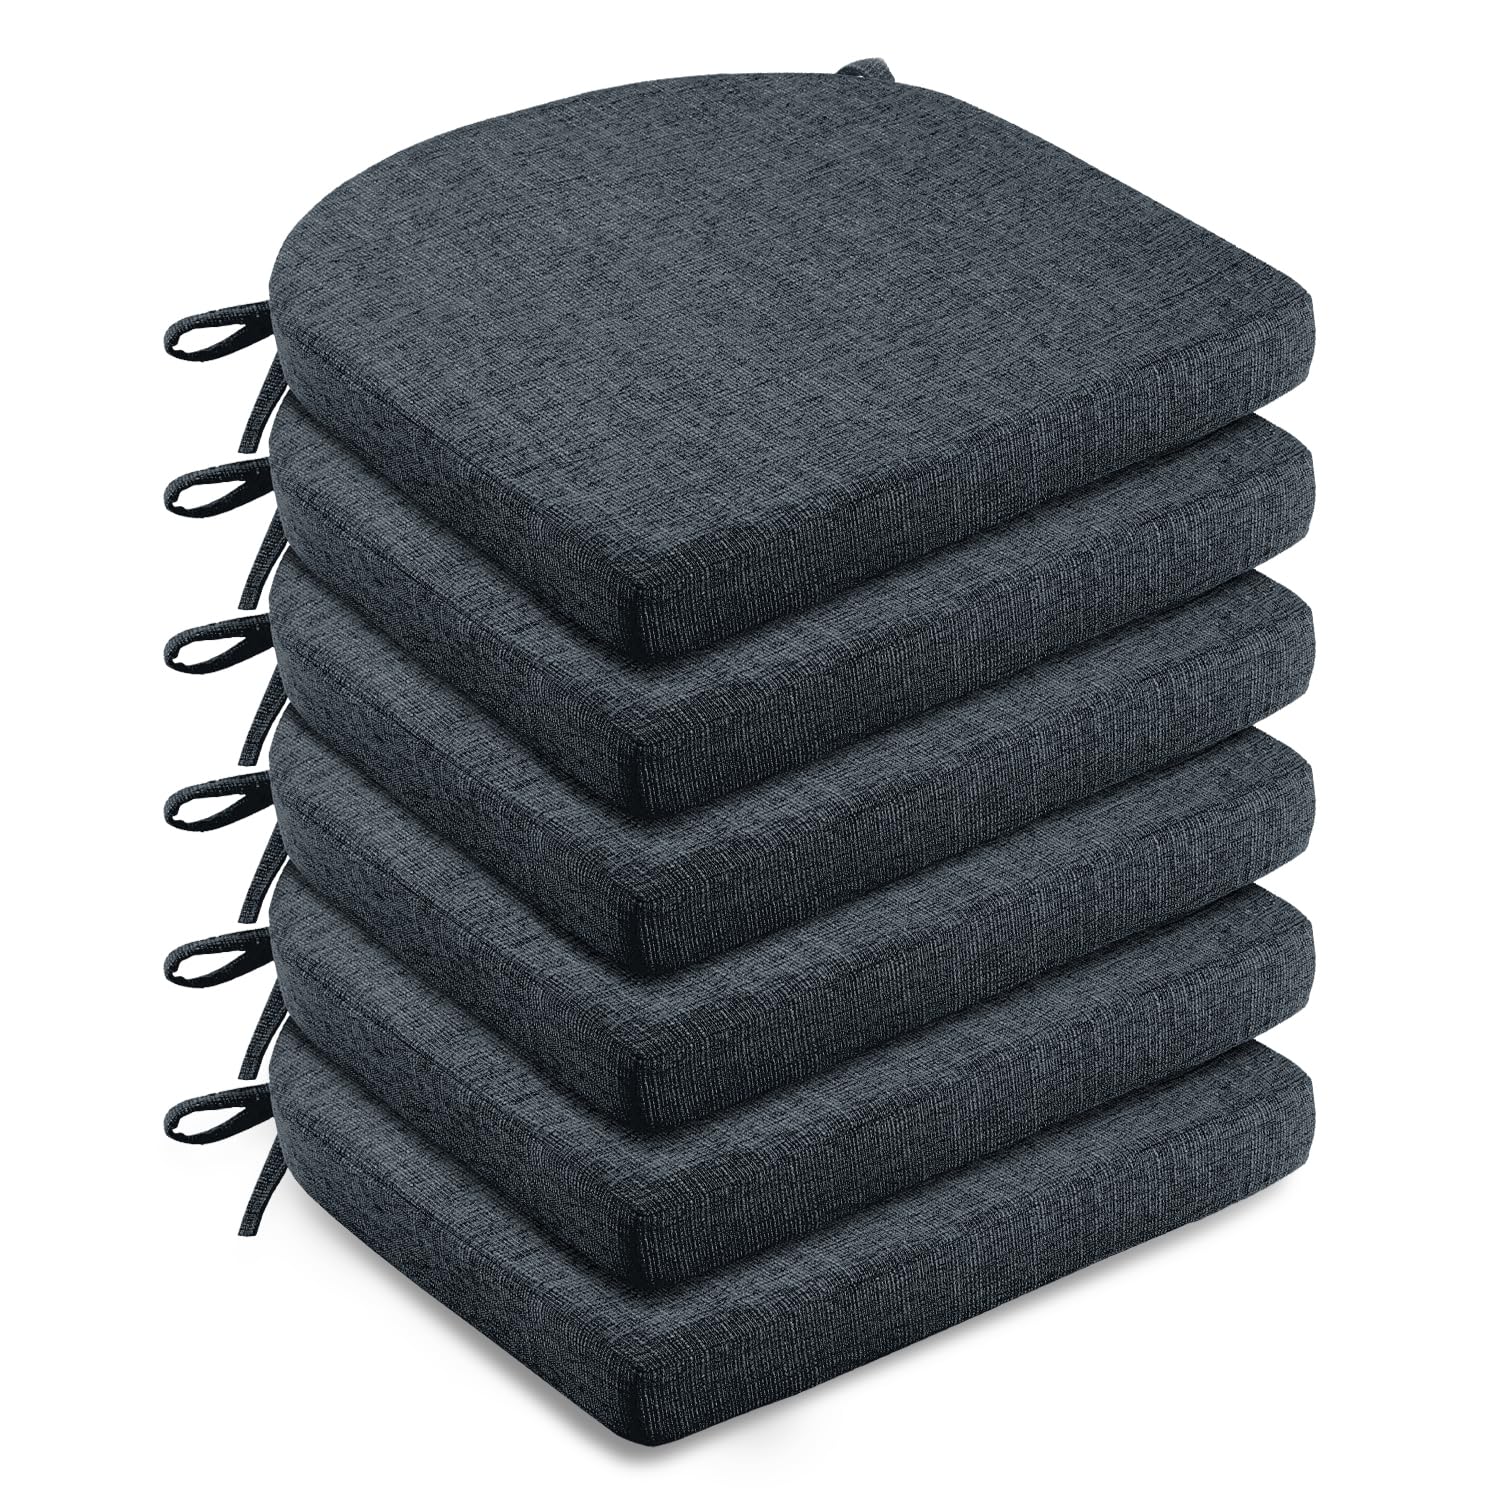 LOVTEX Chair Cushions for Dining Chairs 6 Pack - Memory Foam Chair Pads with Ties and Non-Slip Backing - Seat Cushion for Kitchen Chair 16x16x2, Navy